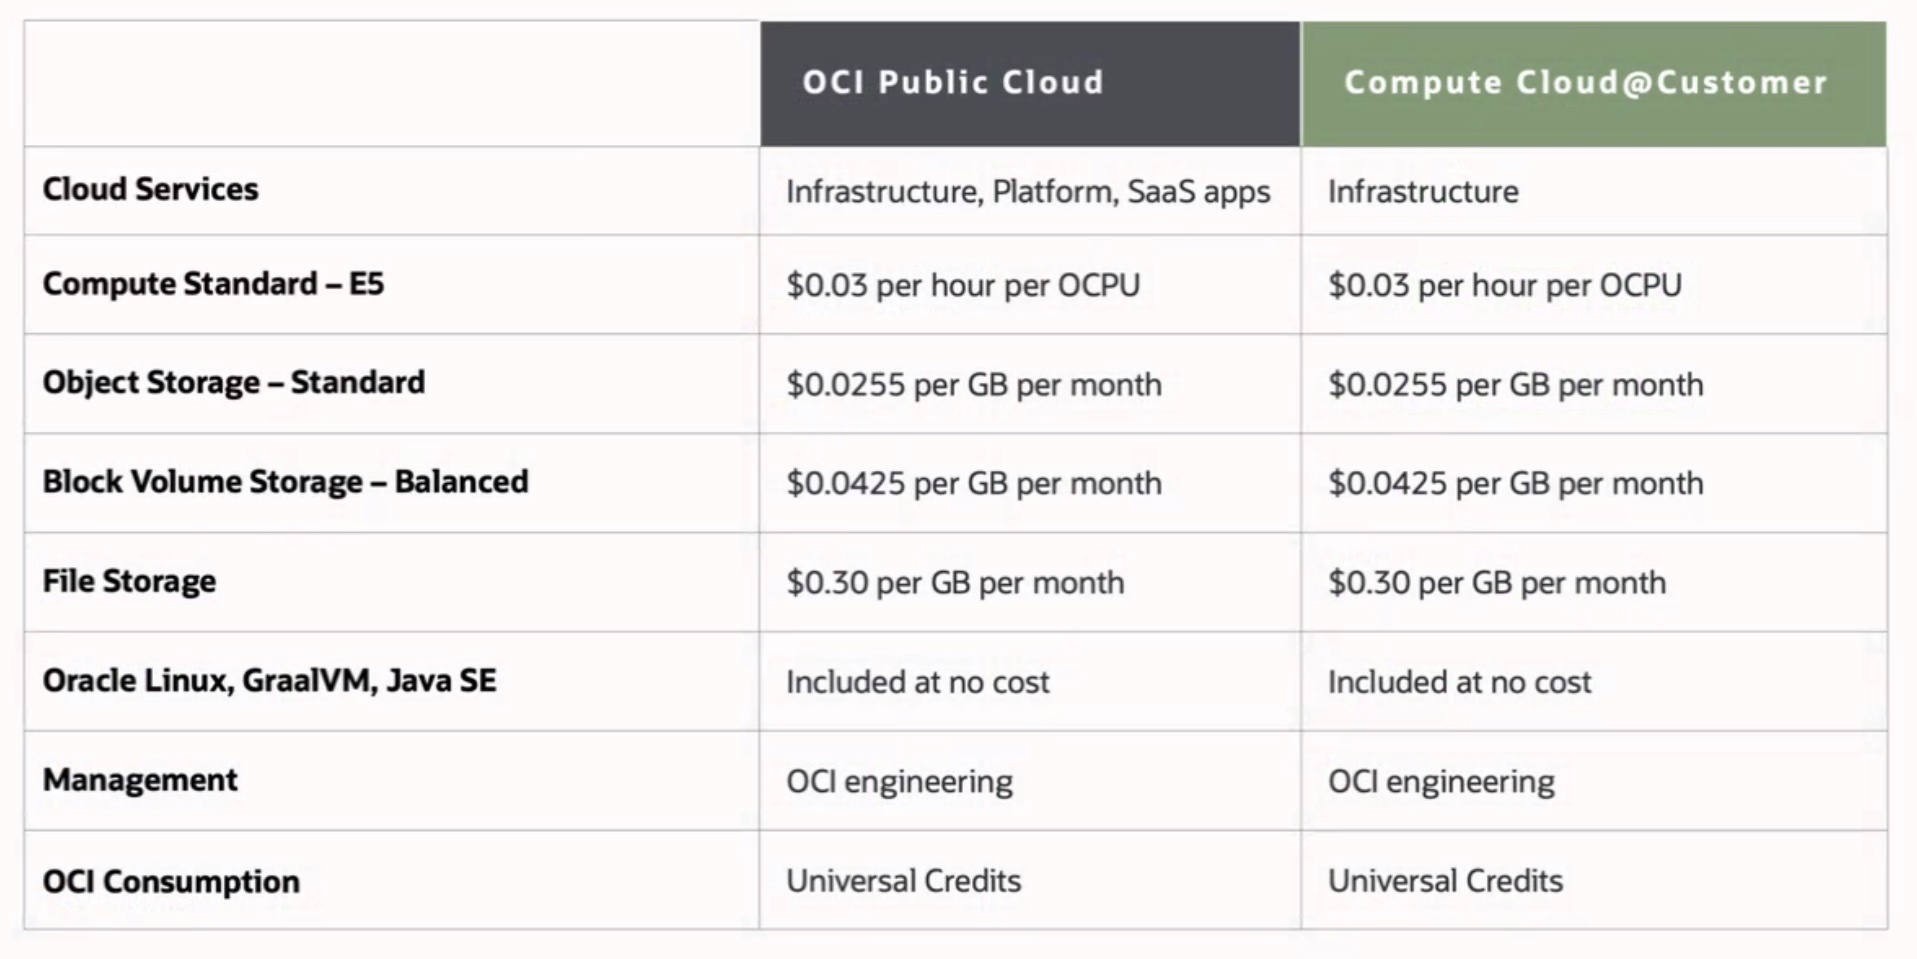 Oracle Computer Cloud@Customer pricing